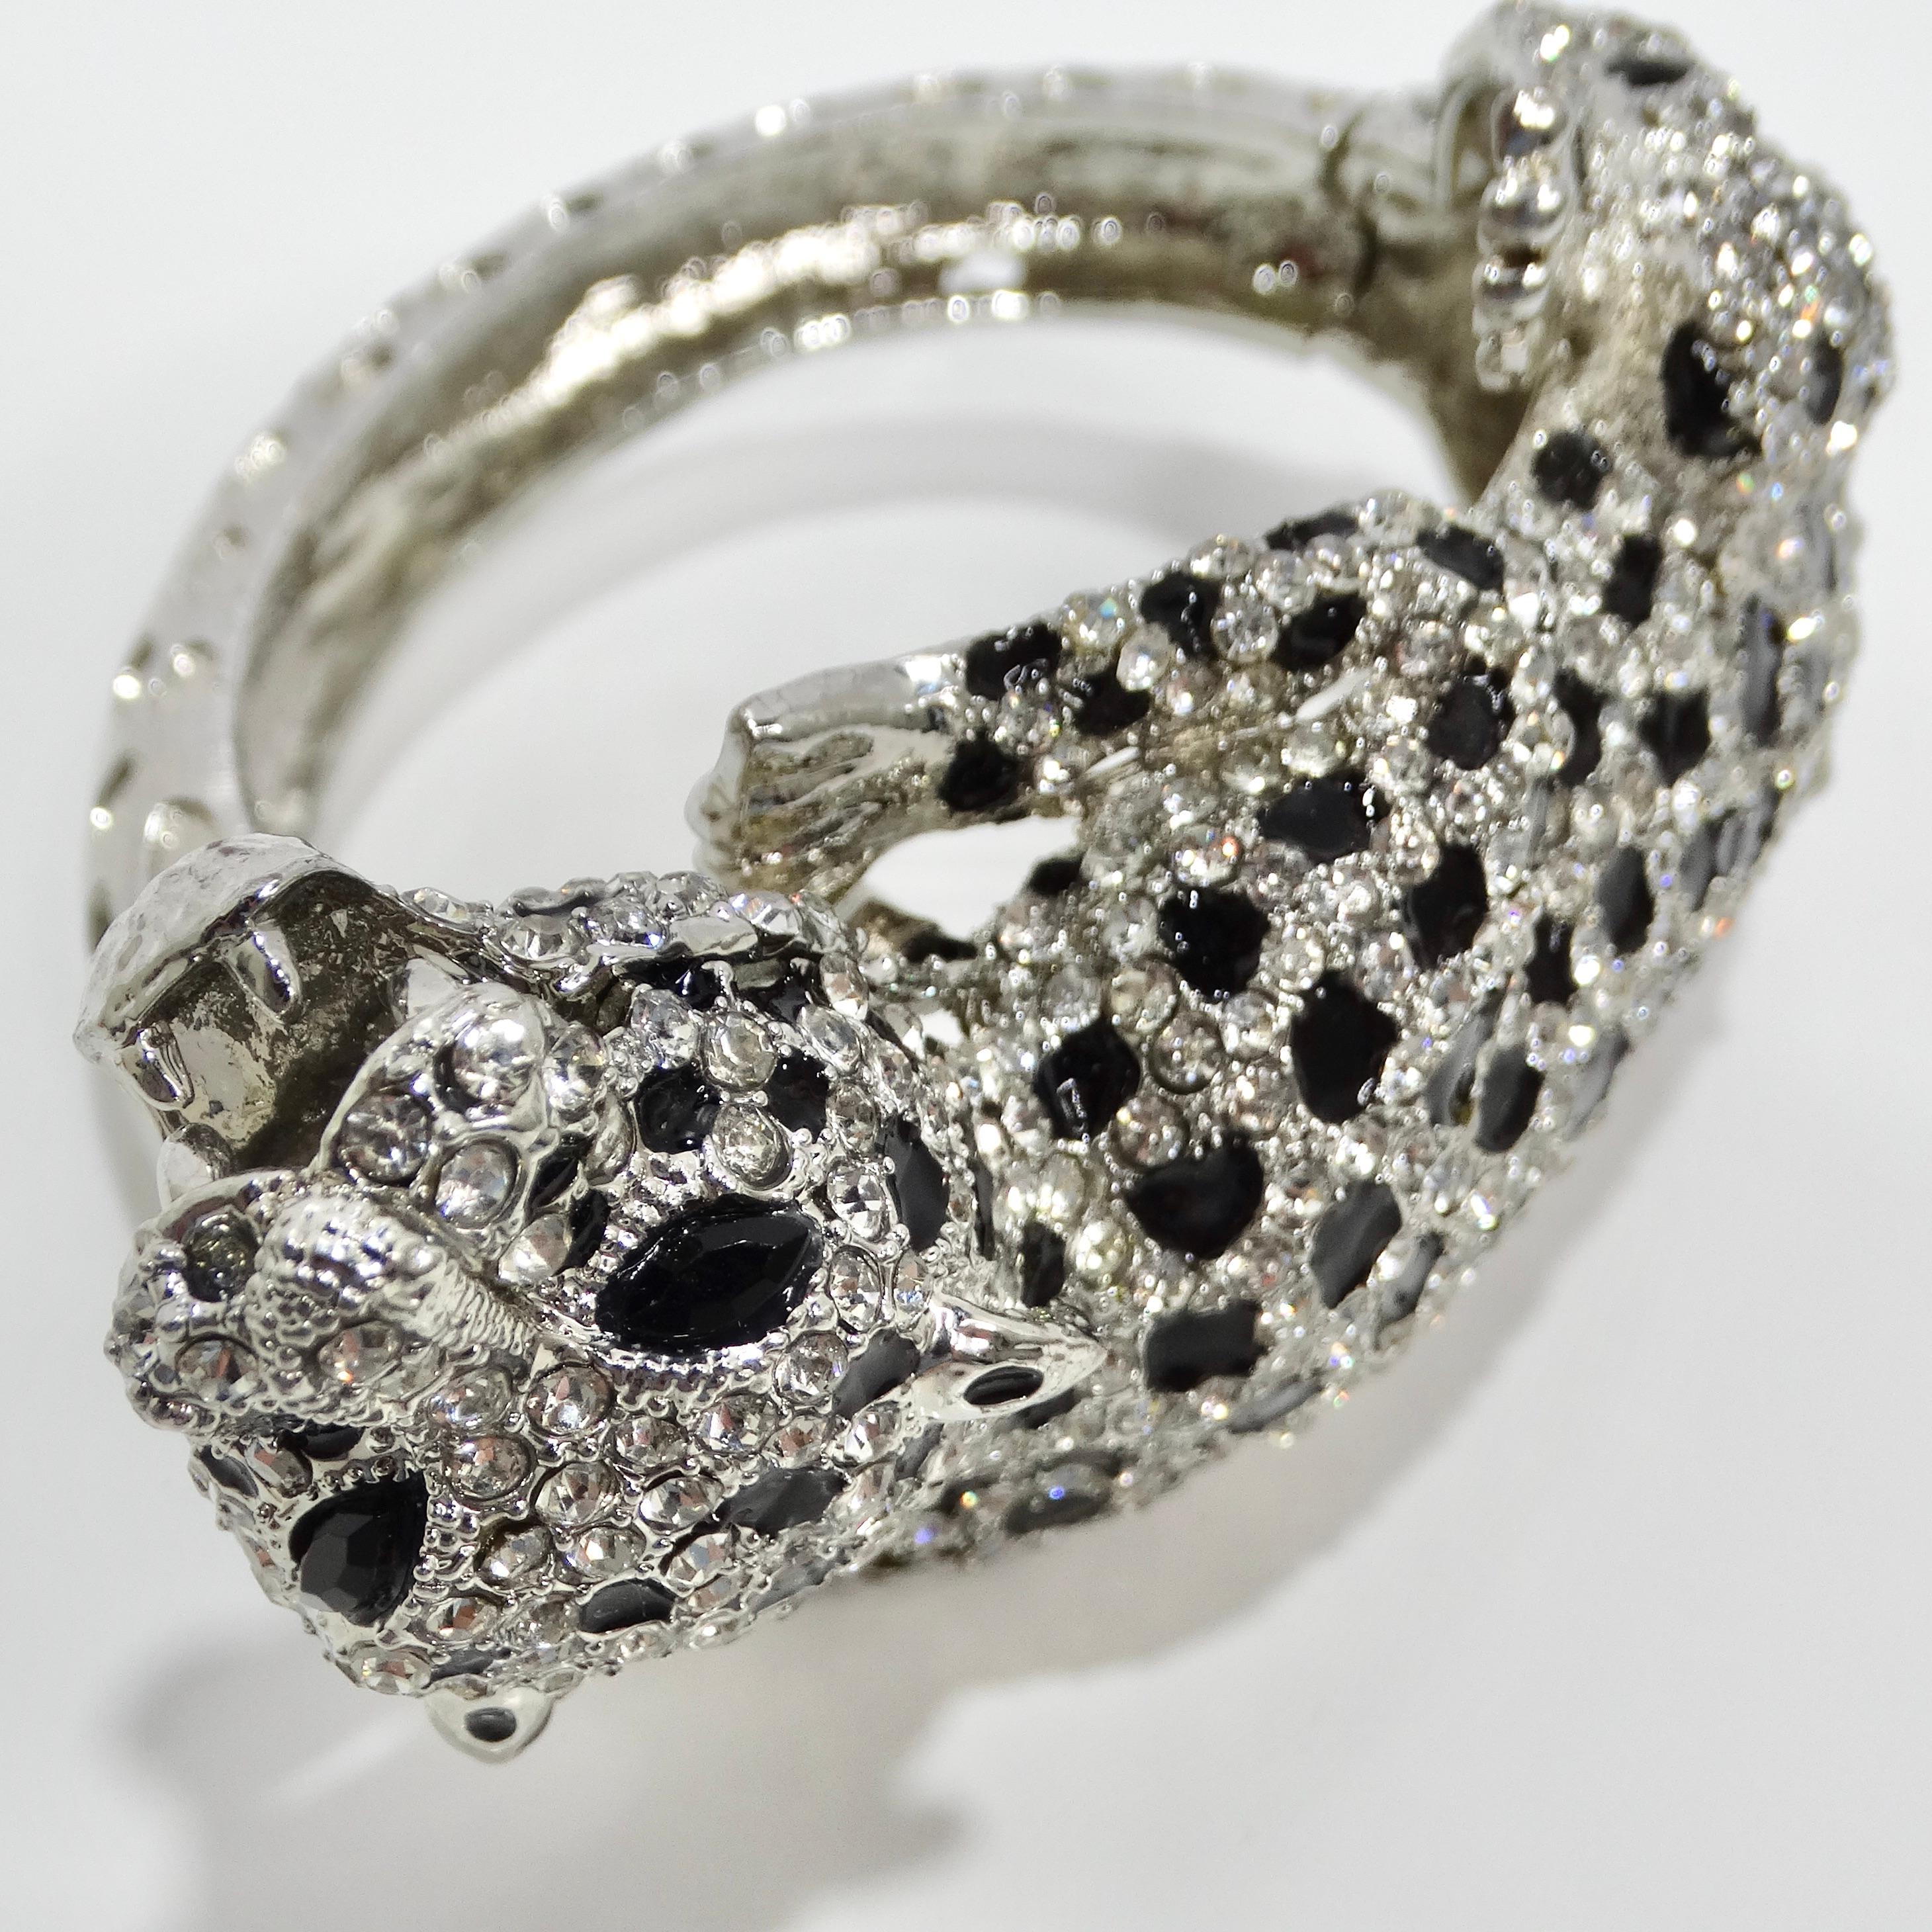 1990s Cartier Inspired Rhinestone Panther Cuff Bracelet For Sale 3